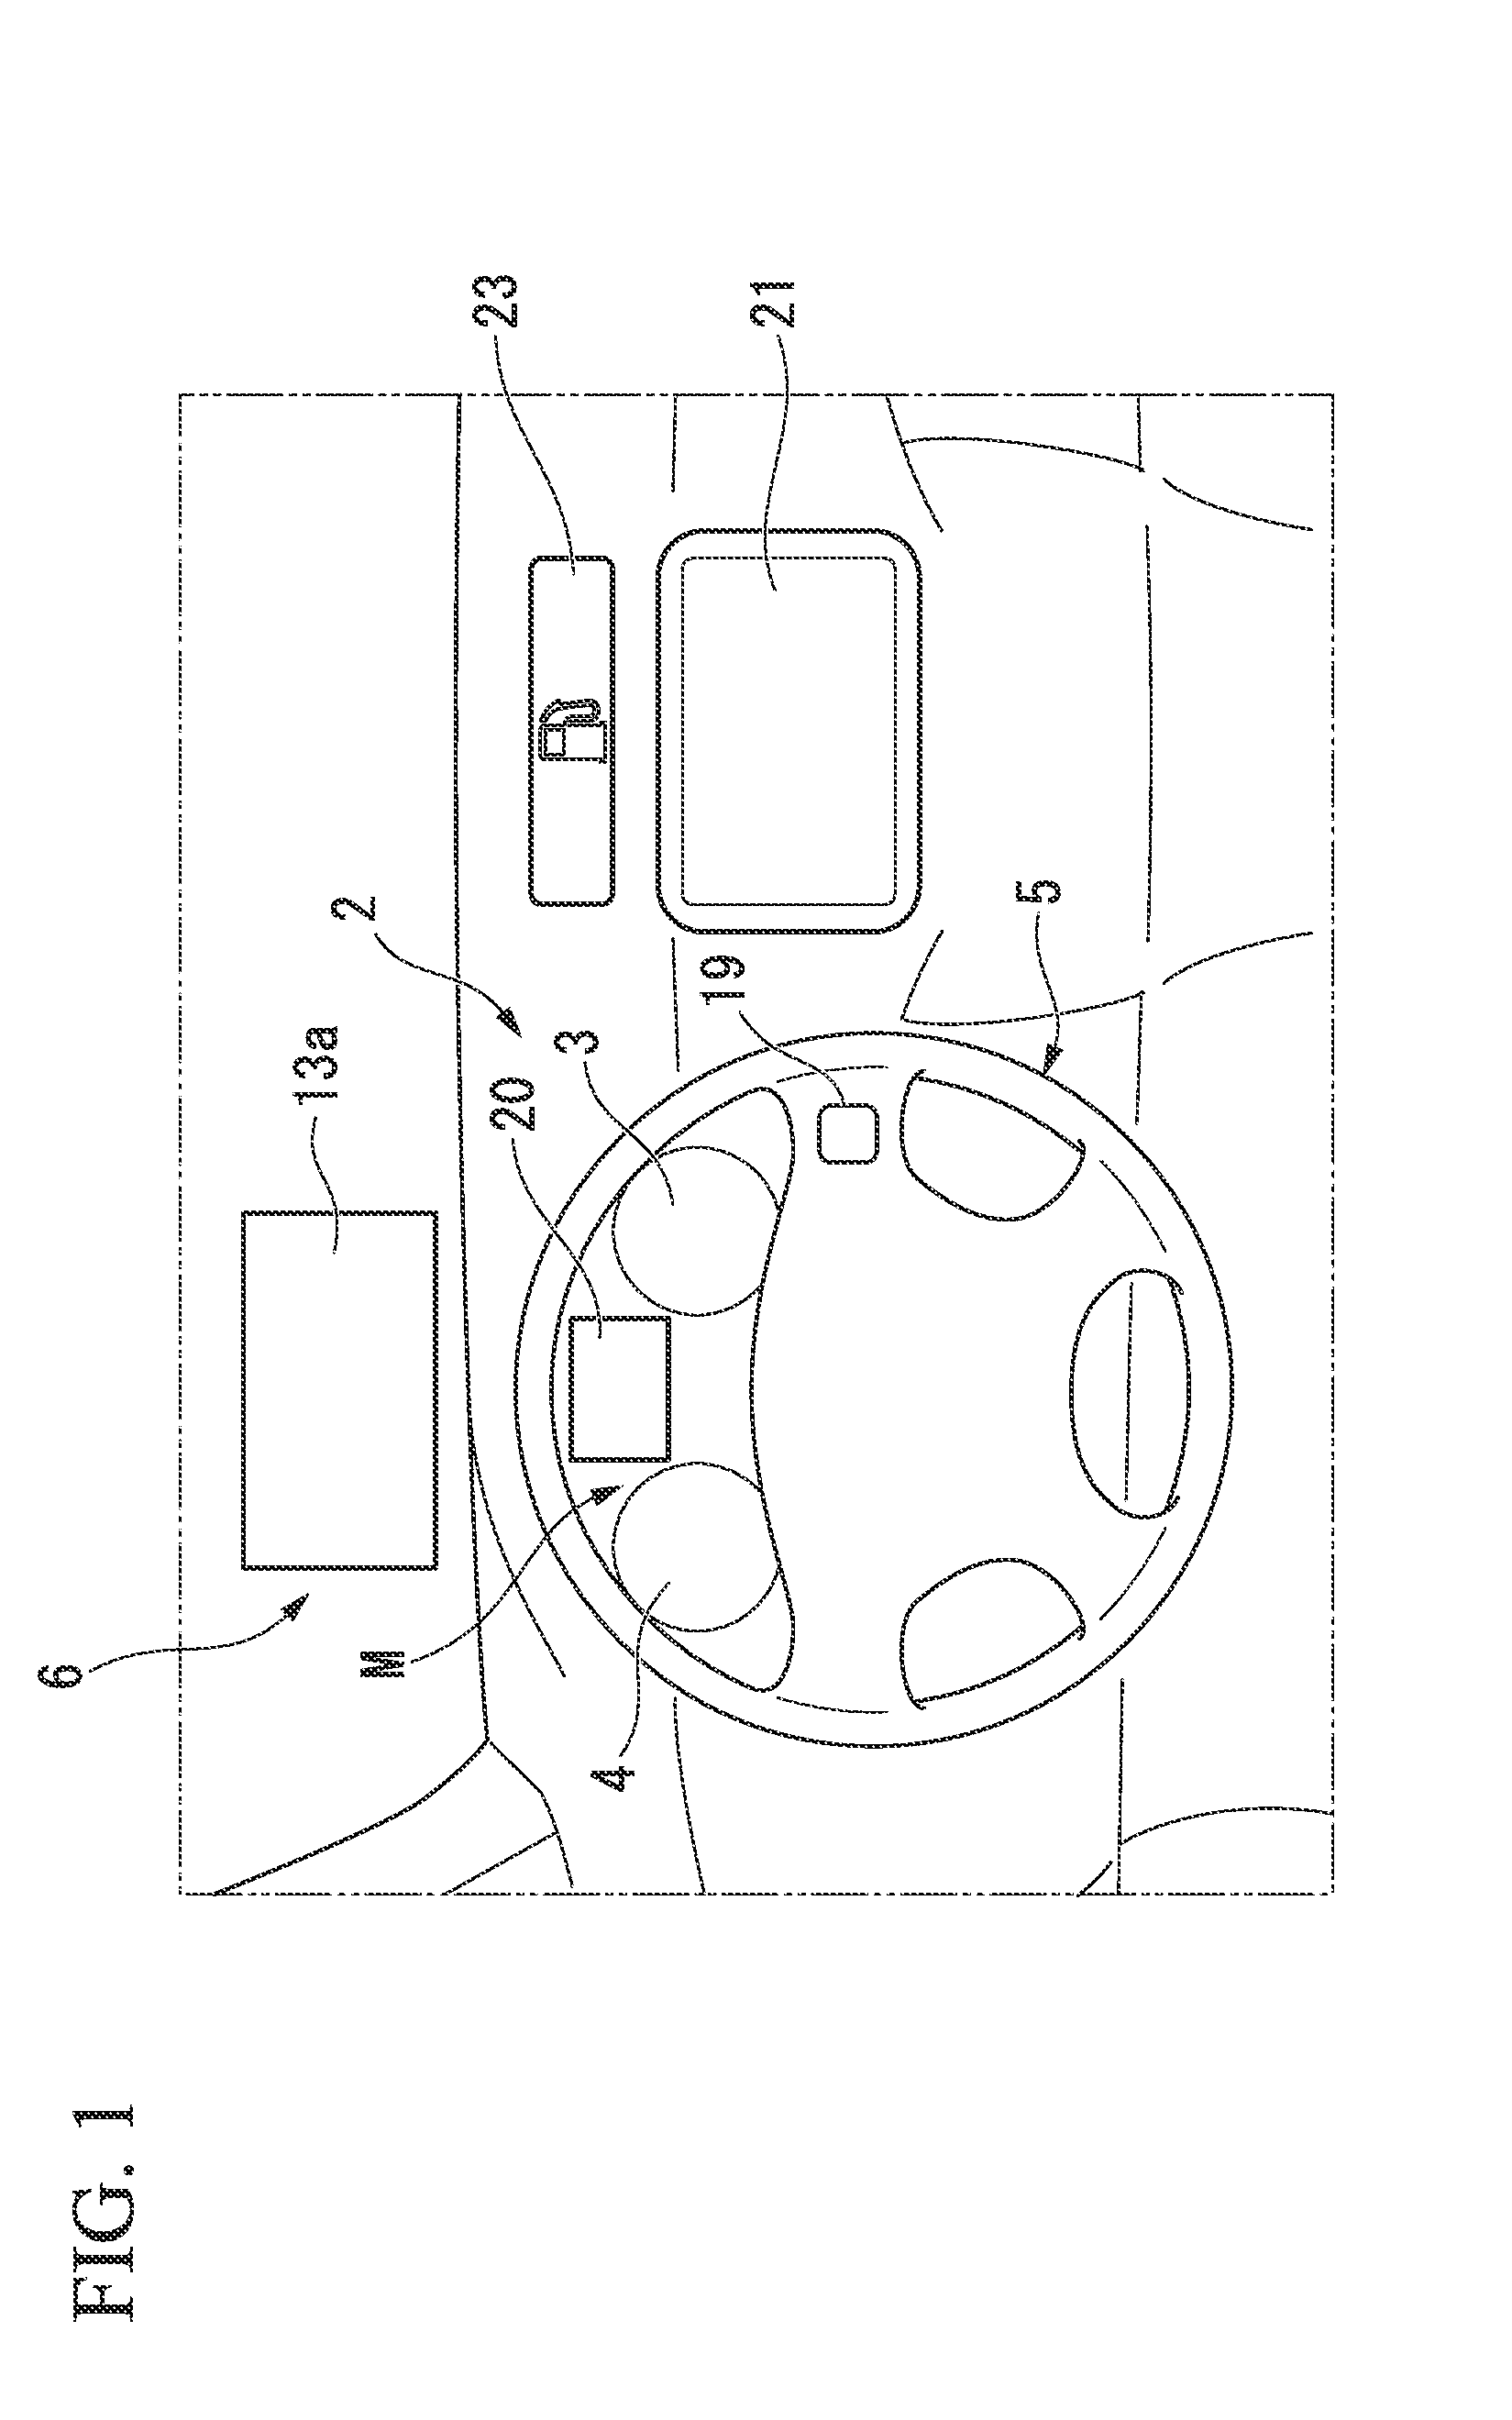 Display device for vehicle